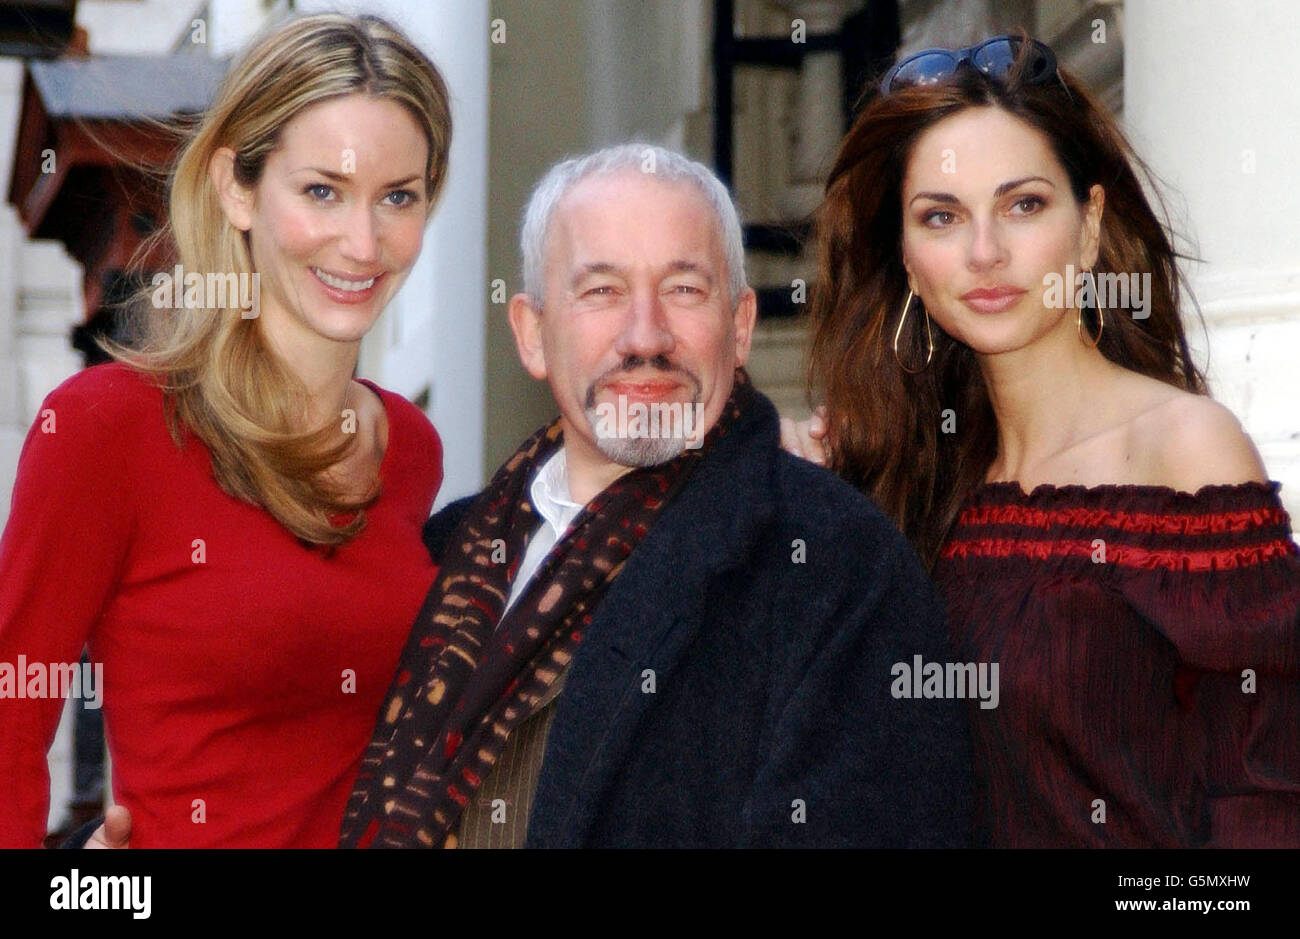 Actor Simon Callow flanked by models Lisa Butcher (left) and Saffron Aldridge, during a photocall outside the Theatre Royal in London's Covent Garden, to promote 'An Enchanted Evening' a charity gala concert to celebrate the 20th birthday of the Neurofibromatosis Association. * The concert, directed by Simon Callow, is due to take place on May 5, 2002 at the Theatre Royal. Stock Photo